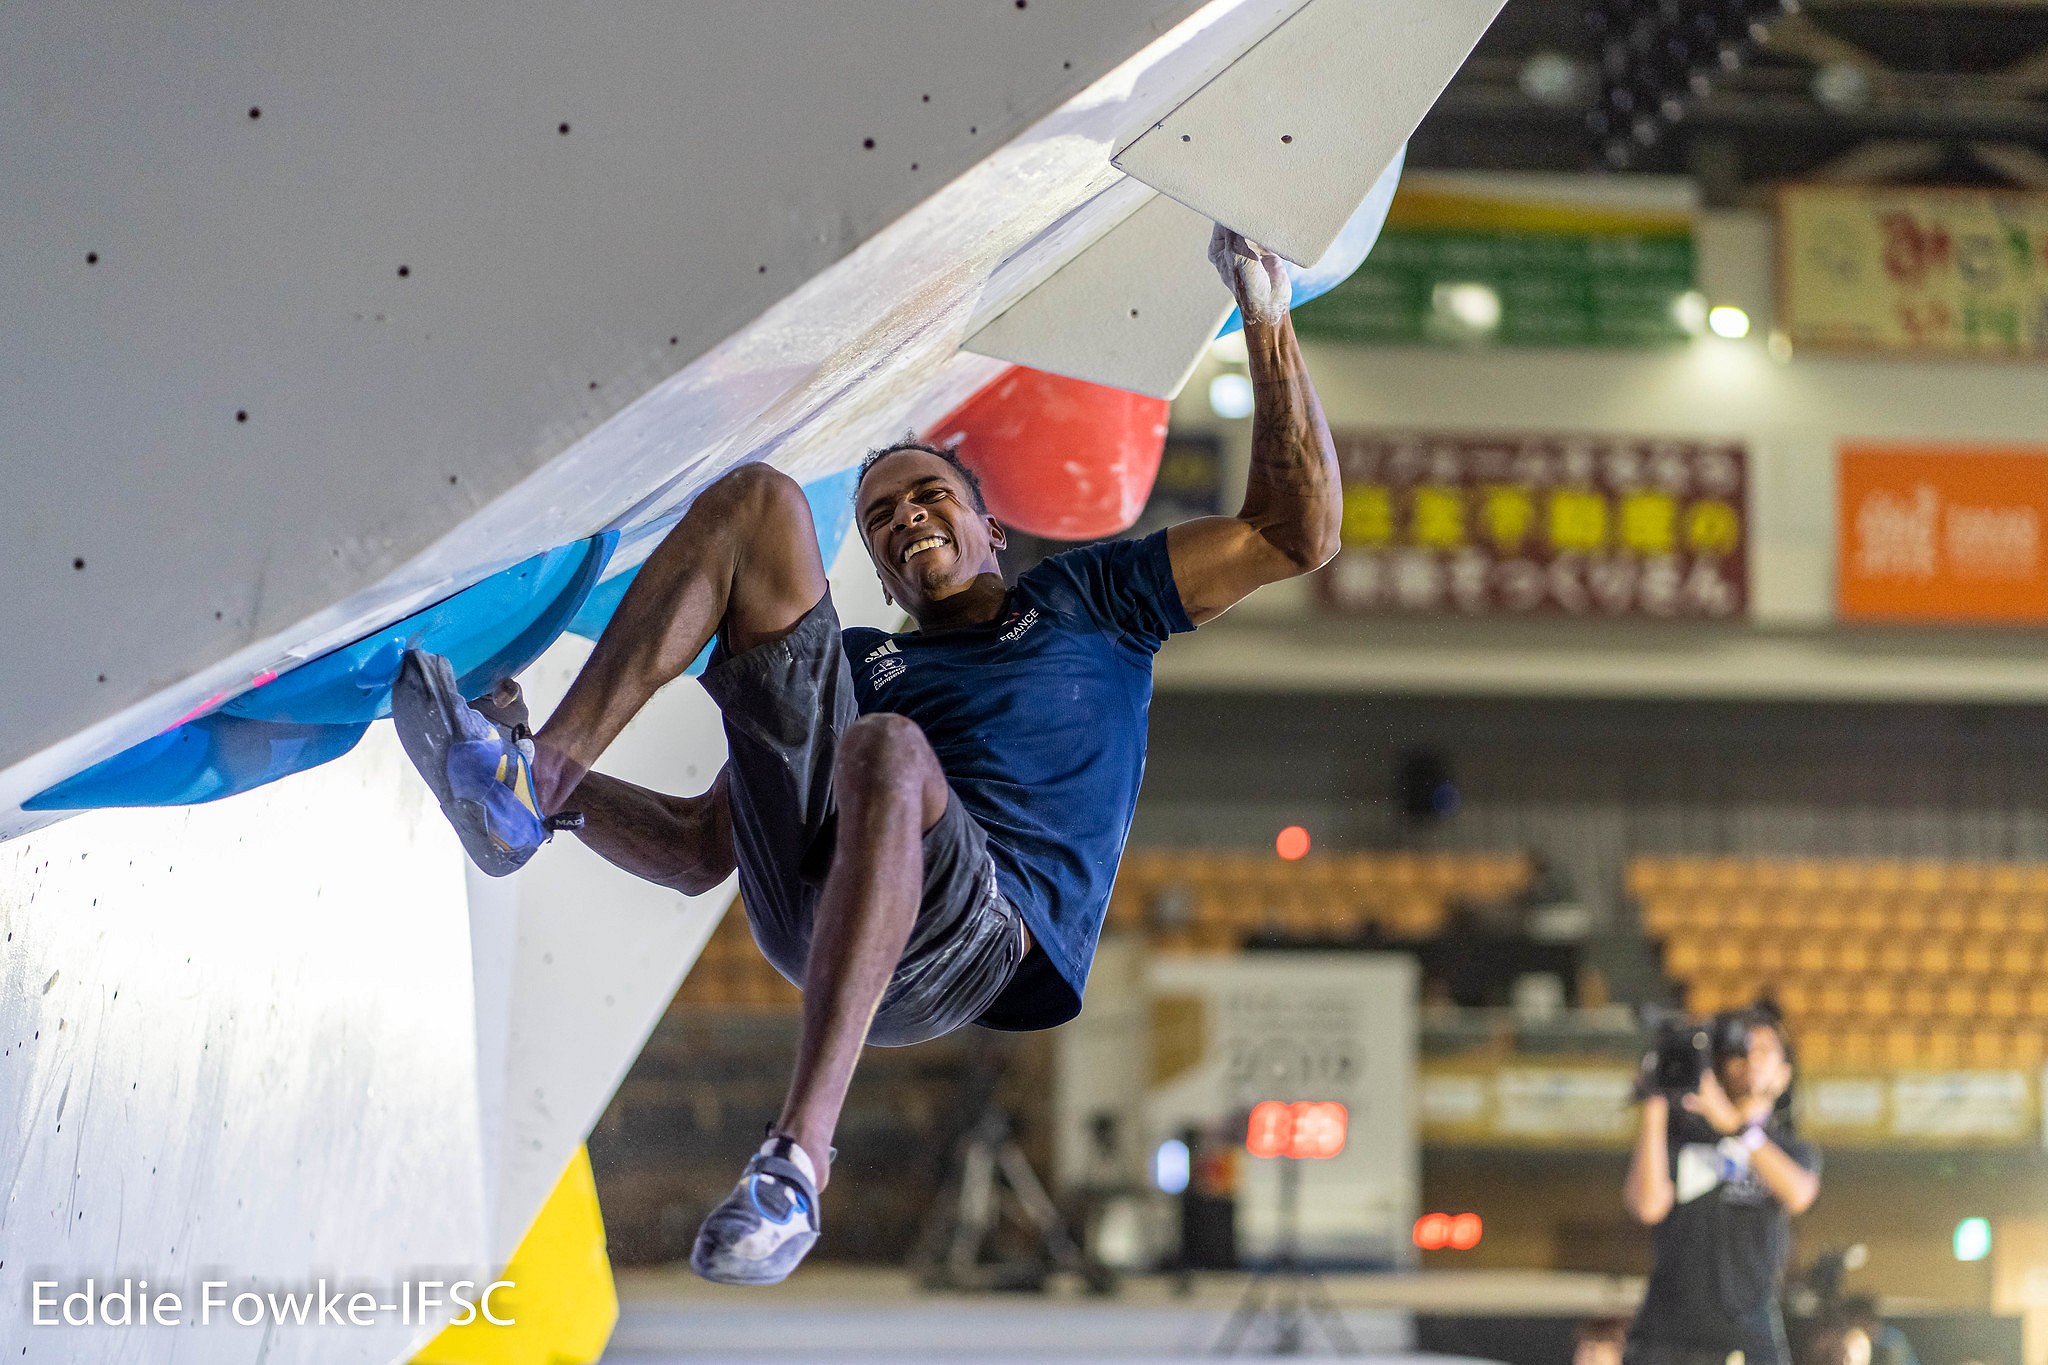 Mickael Mawem earned an Olympic ticket, but has some work to do in Lead.  © Eddie Fowke/IFSC